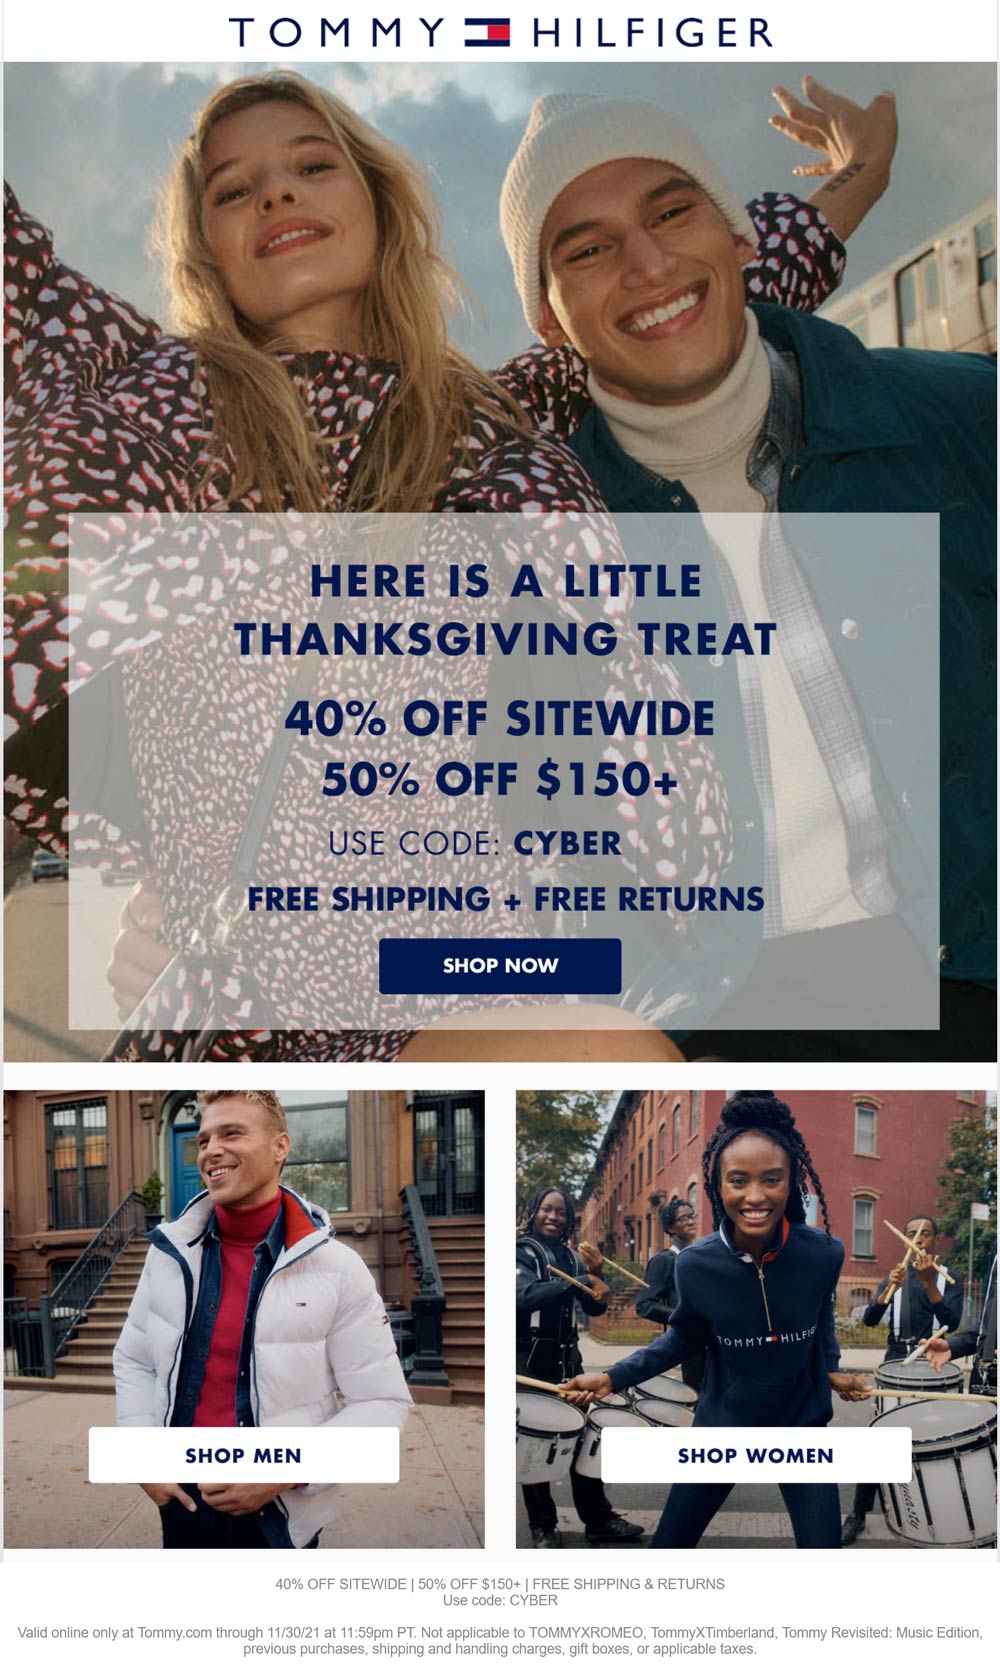 Tommy Hilfiger stores Coupon  40-50% off online at Tommy Hilfiger via promo code CYBER #tommyhilfiger 